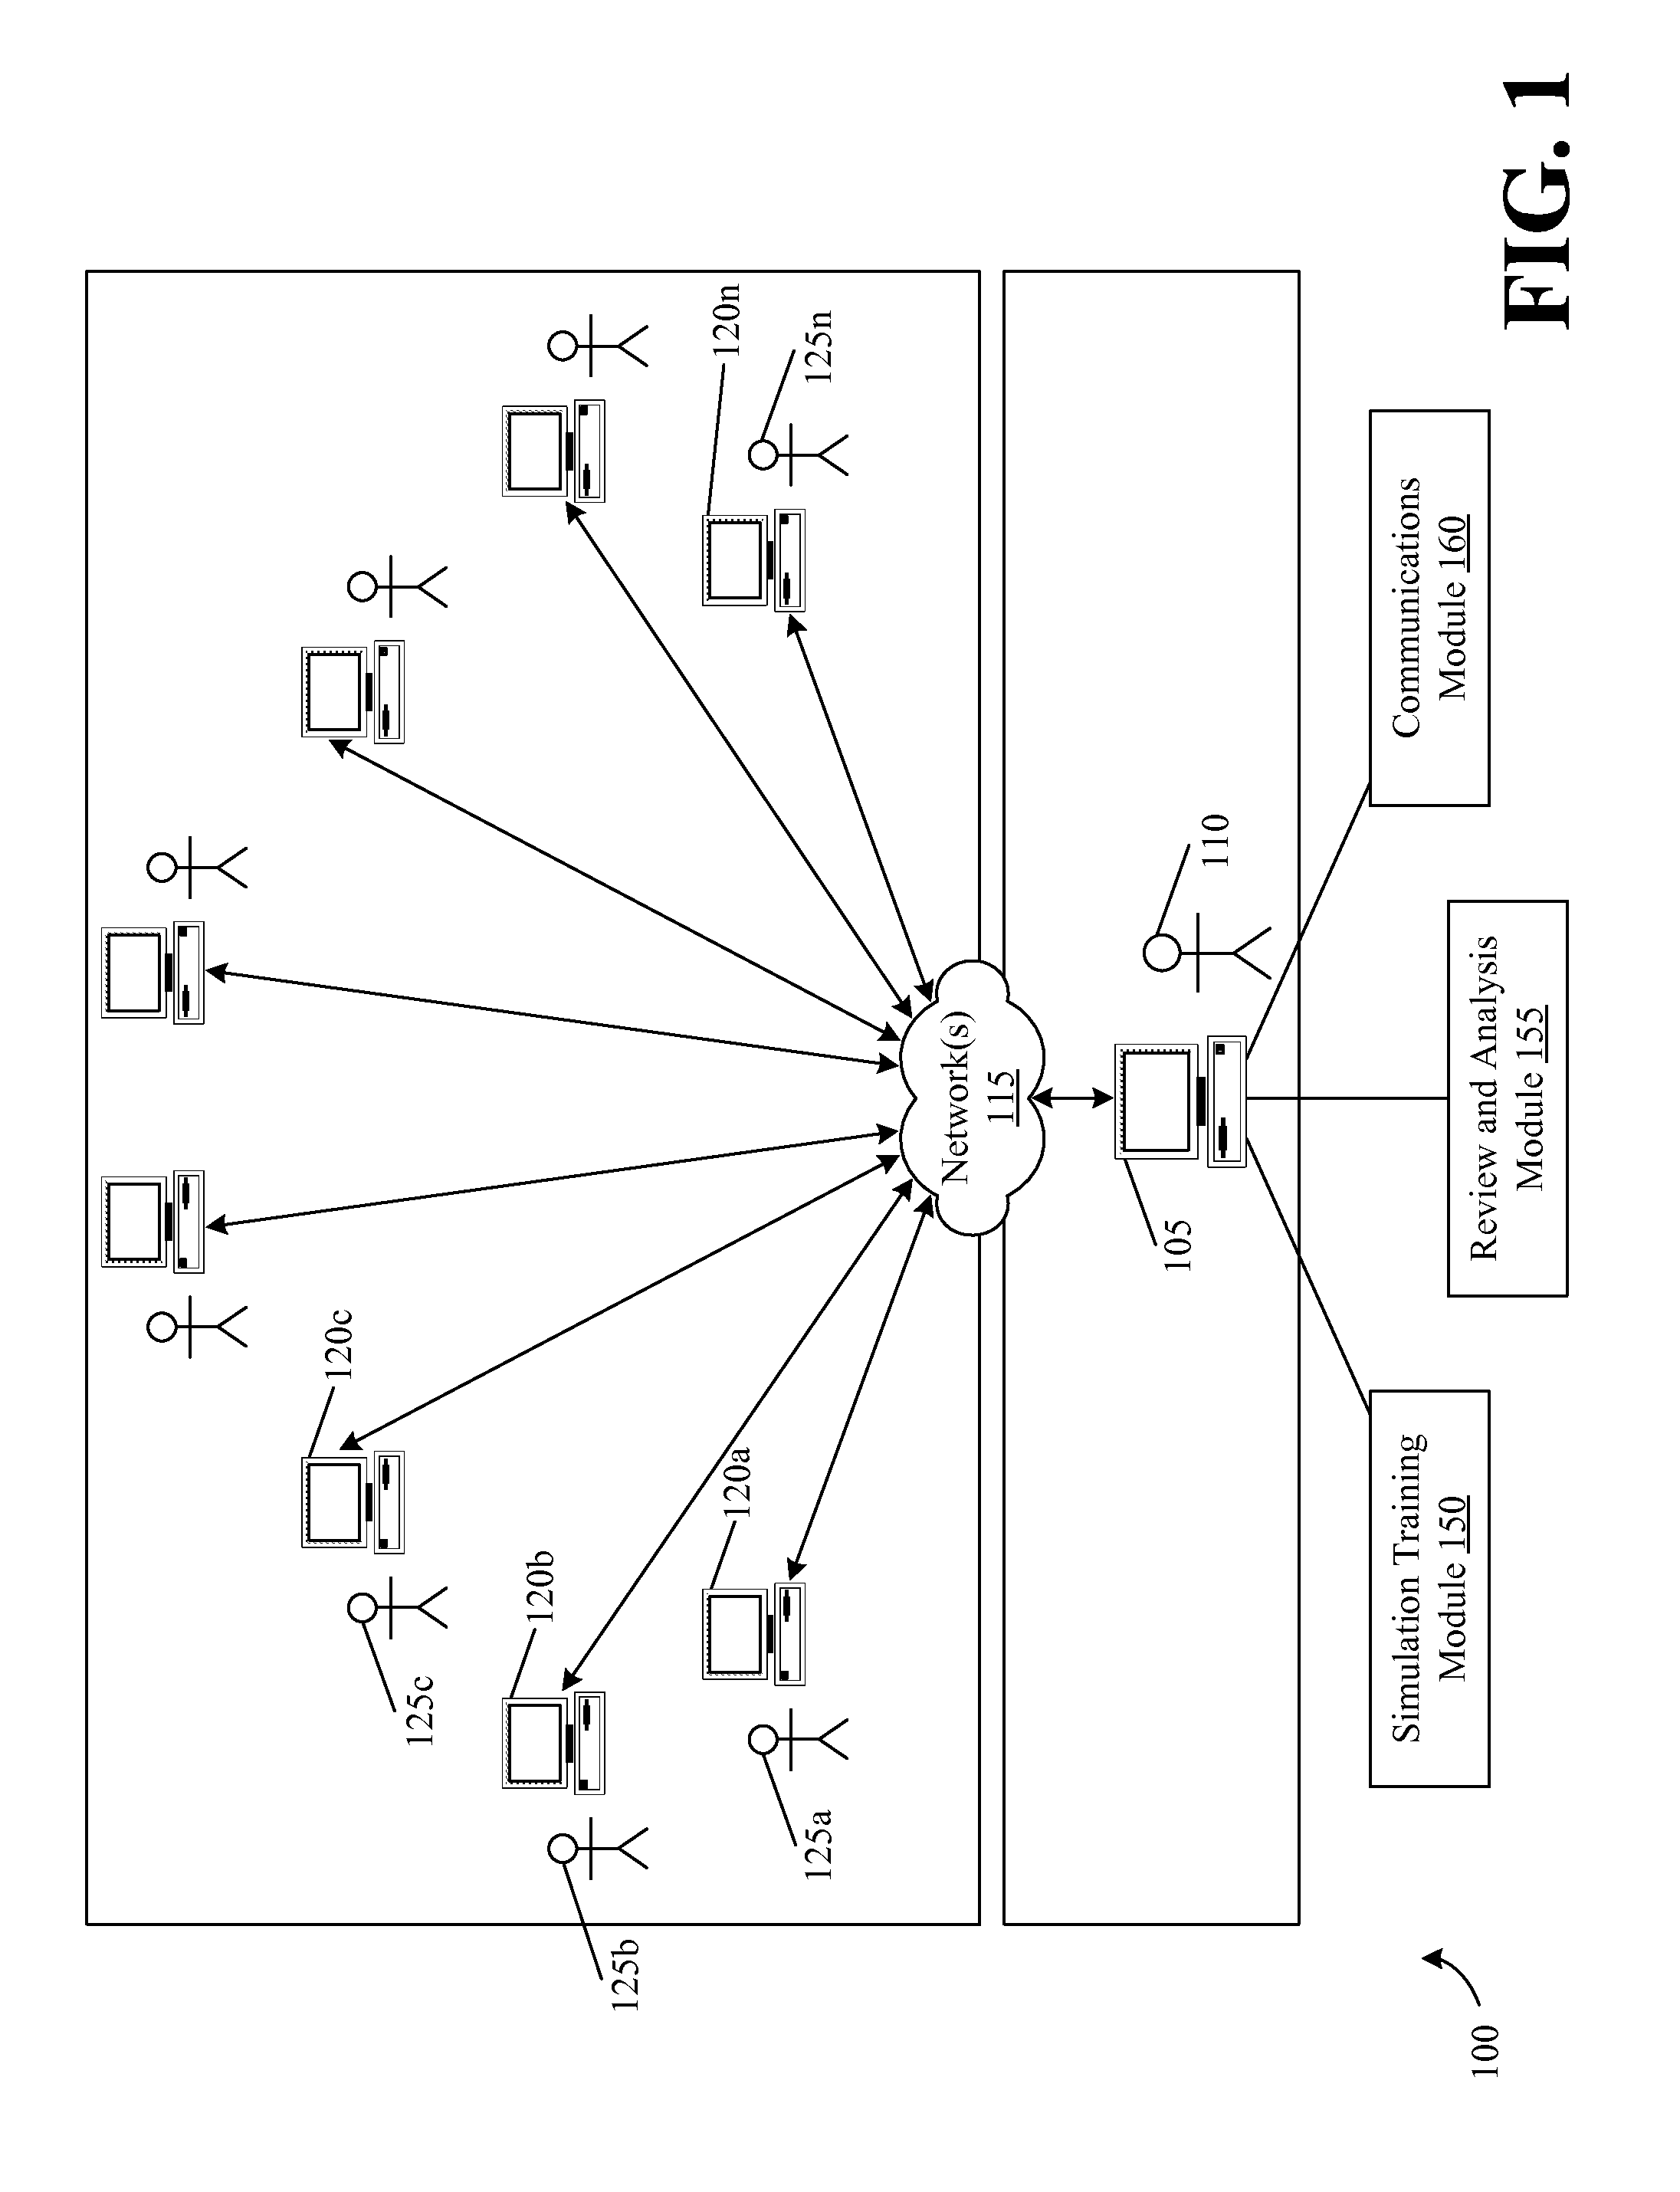 Systems and Methods Providing Distributed Training Simulations